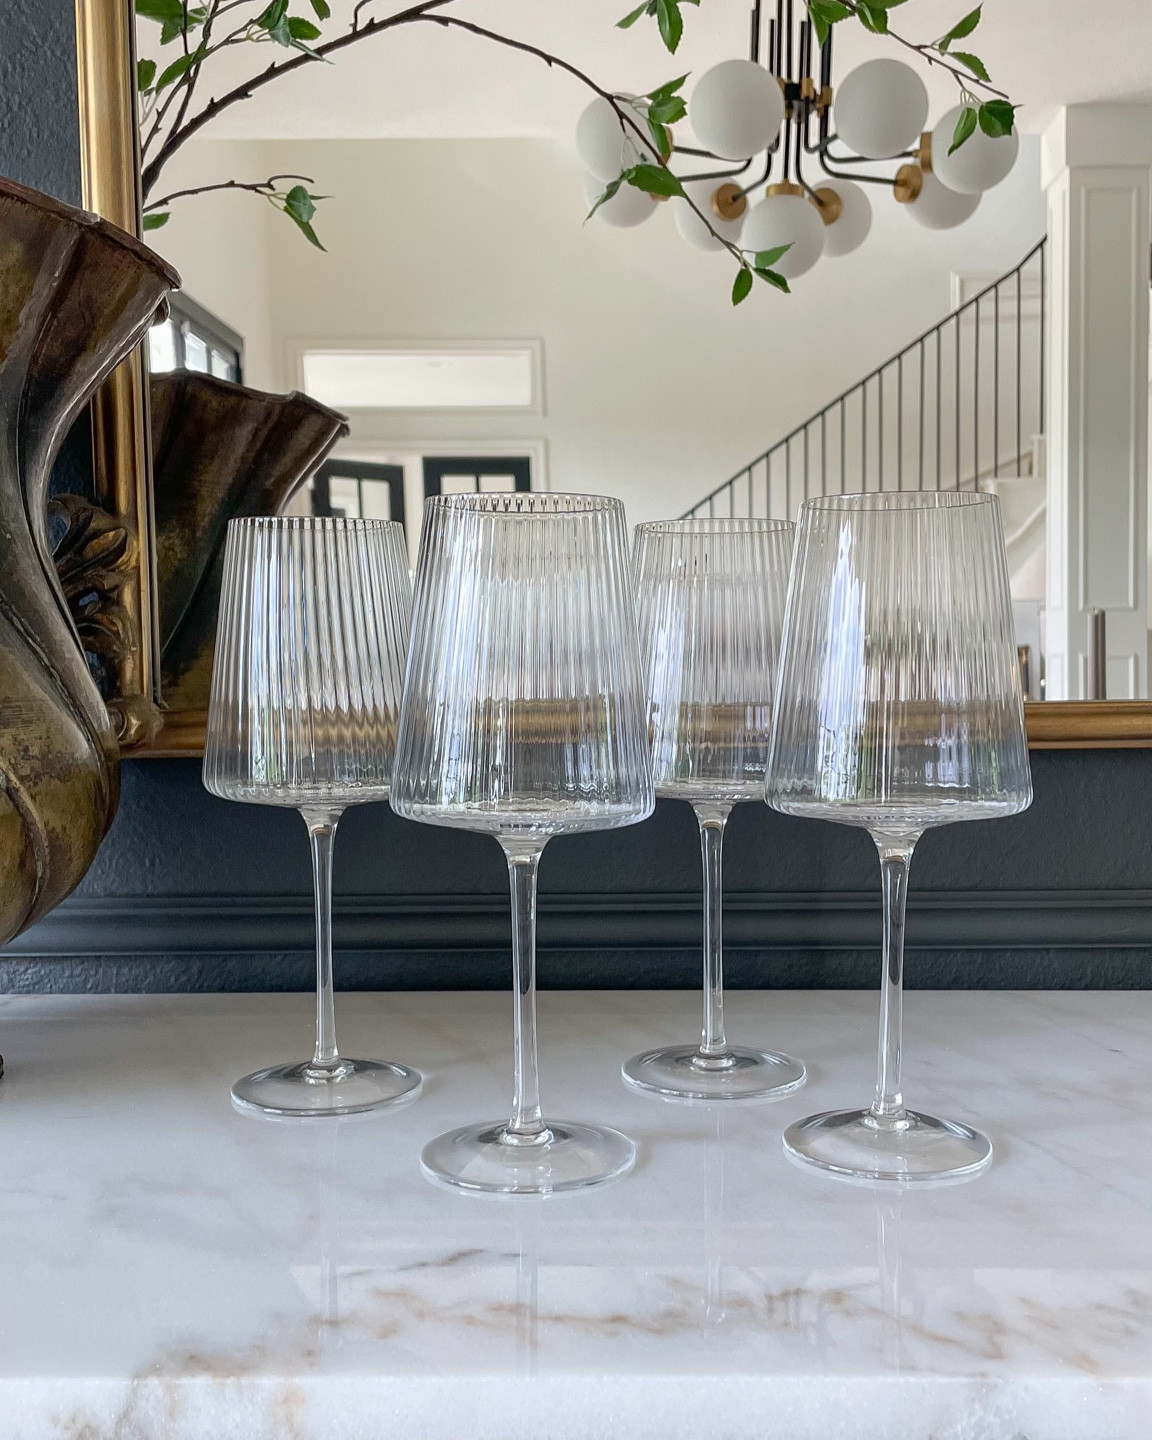 Set of 8 Fluted Wine Glasses – Turn The Tables - Northbrook, IL